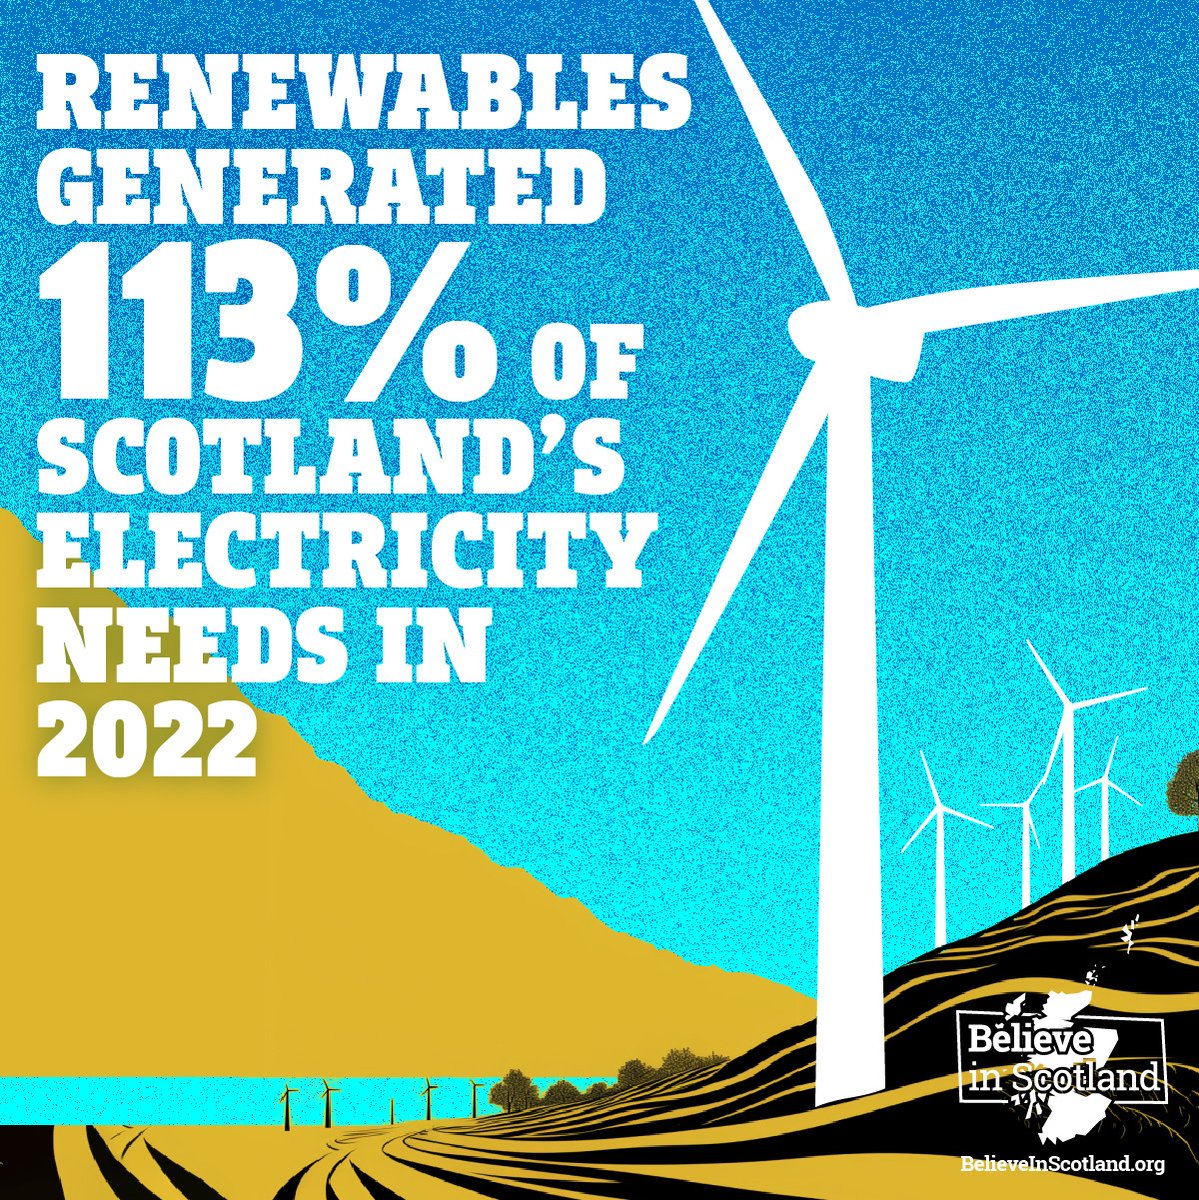 🌱 The Green sector delivered more electricity than Scotland used for the first time. 🏴󠁧󠁢󠁳󠁣󠁴󠁿 Renewable technologies generated the equivalent of 113% of Scotland's overall electricity consumption in 2022.